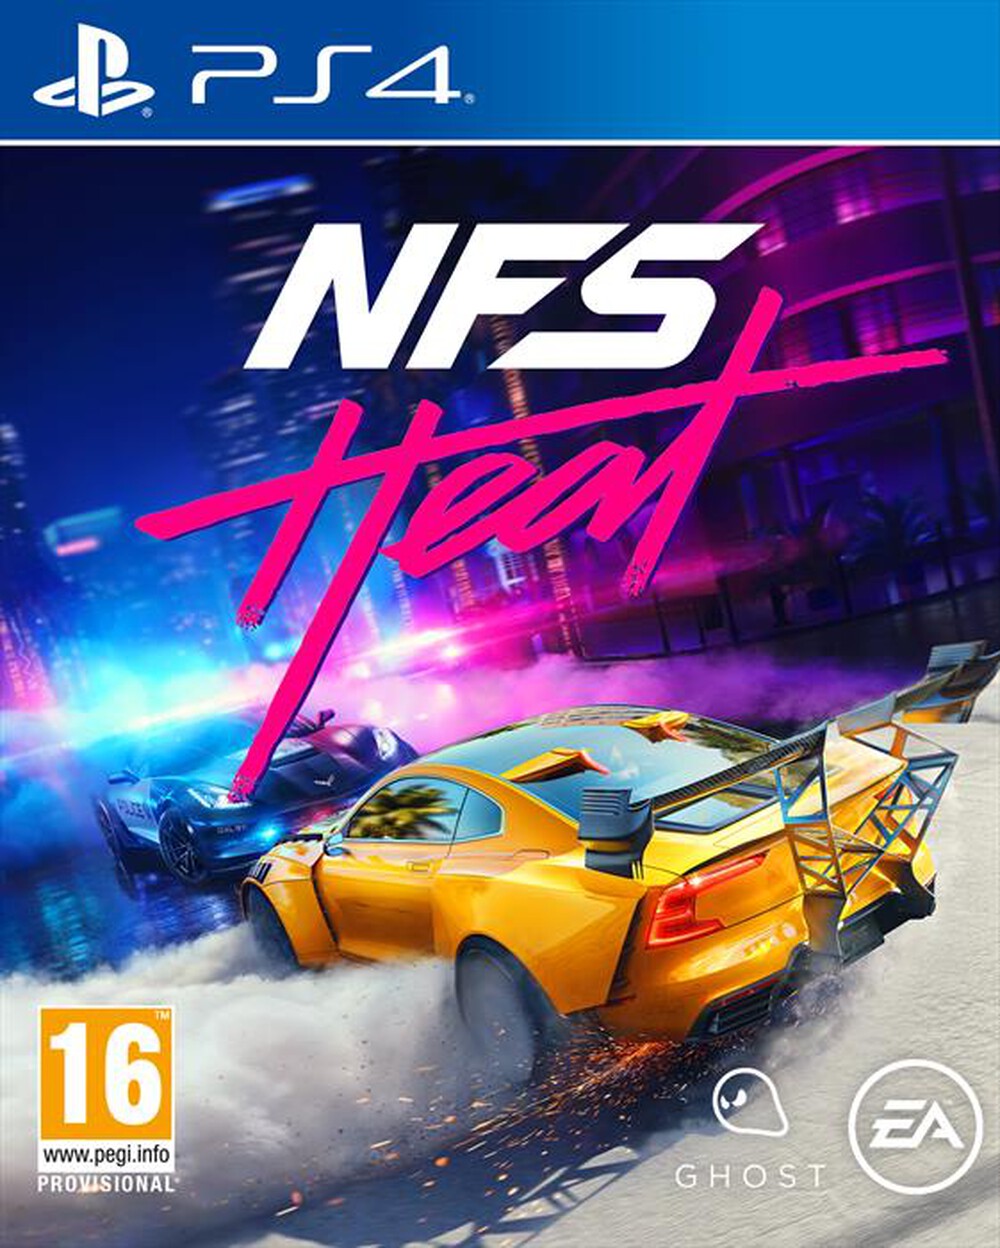 "ELECTRONIC ARTS - NEED FOR SPEED HEAT PS4"